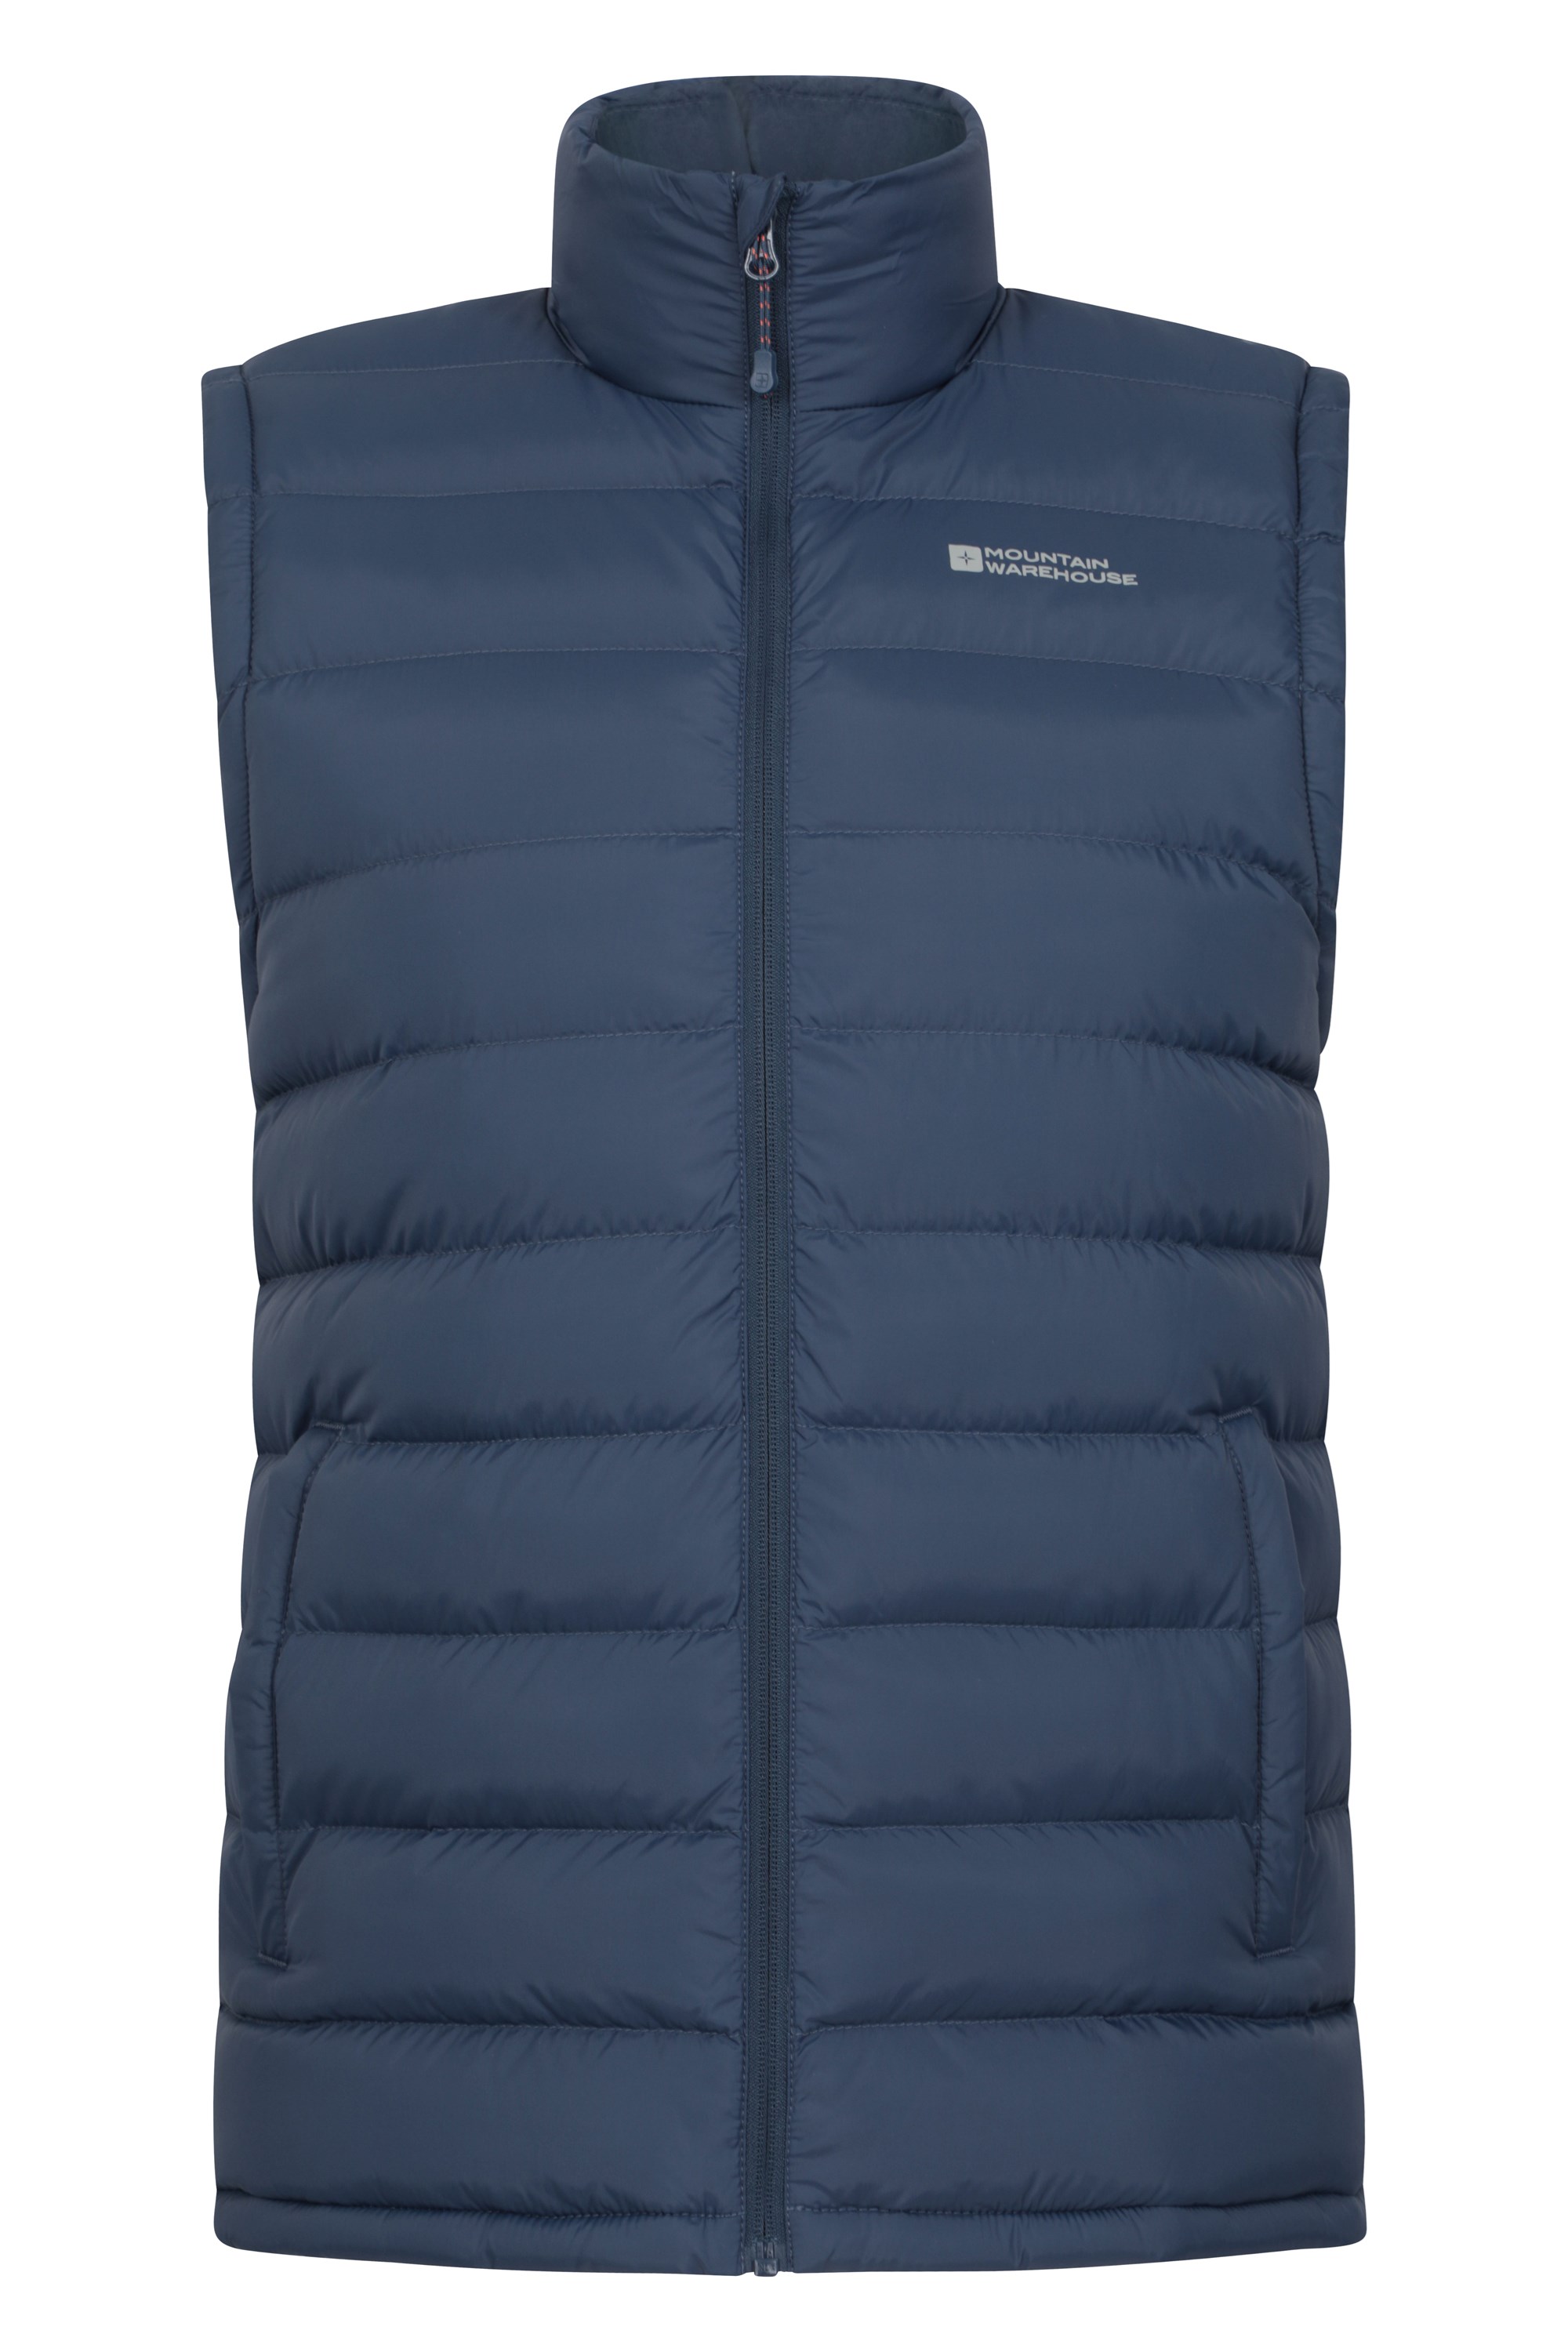 Mountain Warehouse Grasmere Mens Gilet Breathable Running Vest Gilet Pockets Water Resistant Outdoor Jacket Lightweight Body Warmer for Cycling & Hiking 